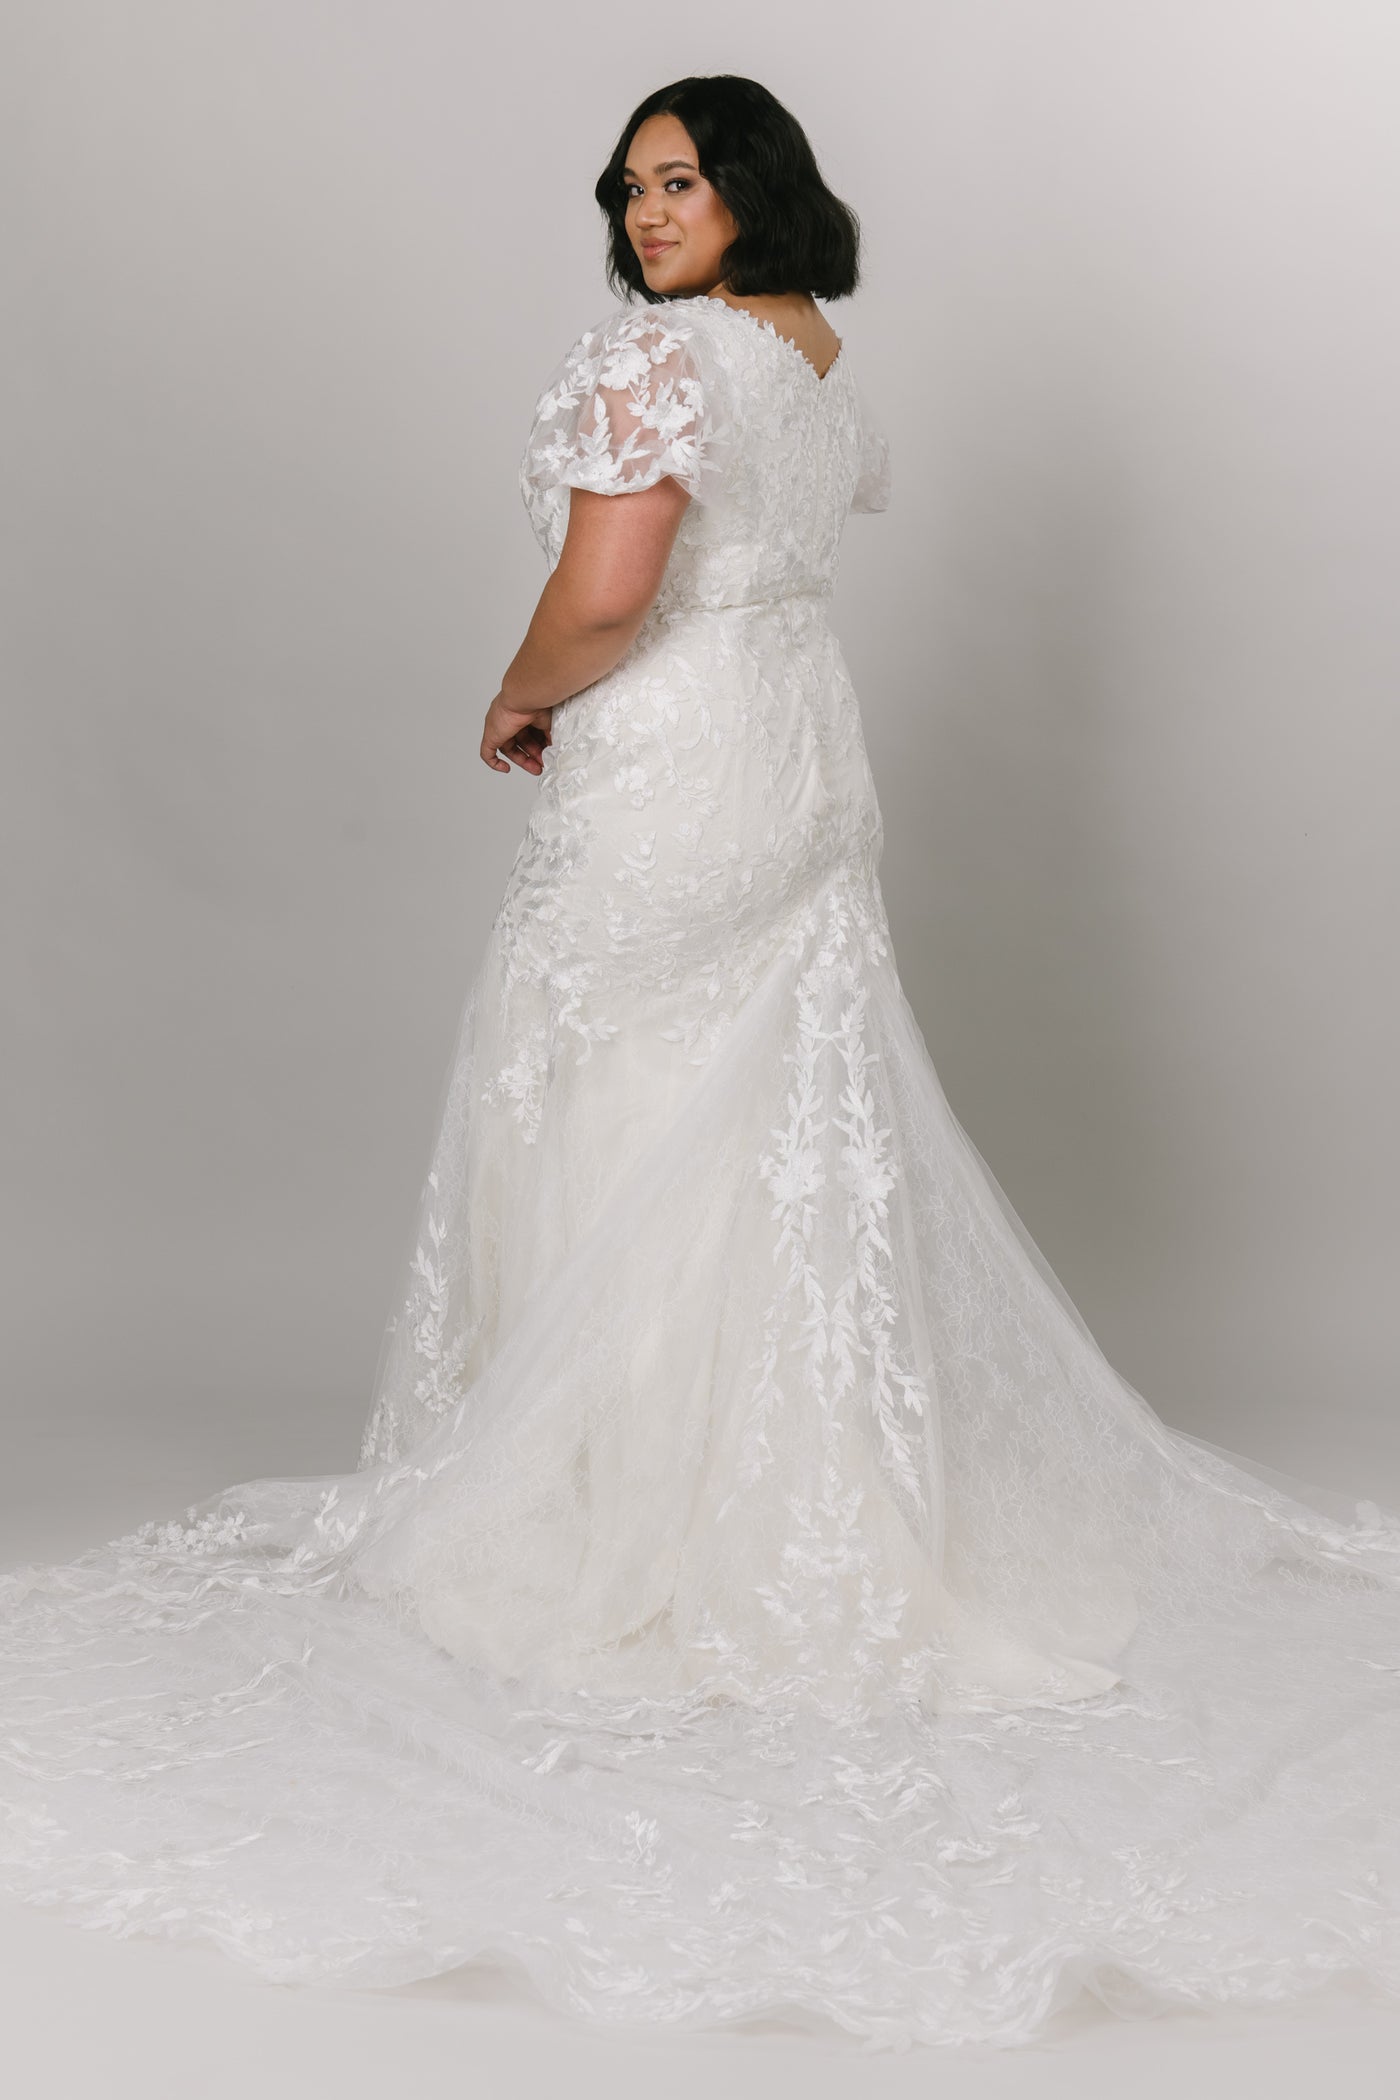 Back view of Moments Made Bridal gown with flutter sleeves and v-neckline. It is a fitted dress with a gorgeous long train. It is the perfect modest wedding dress for any season.